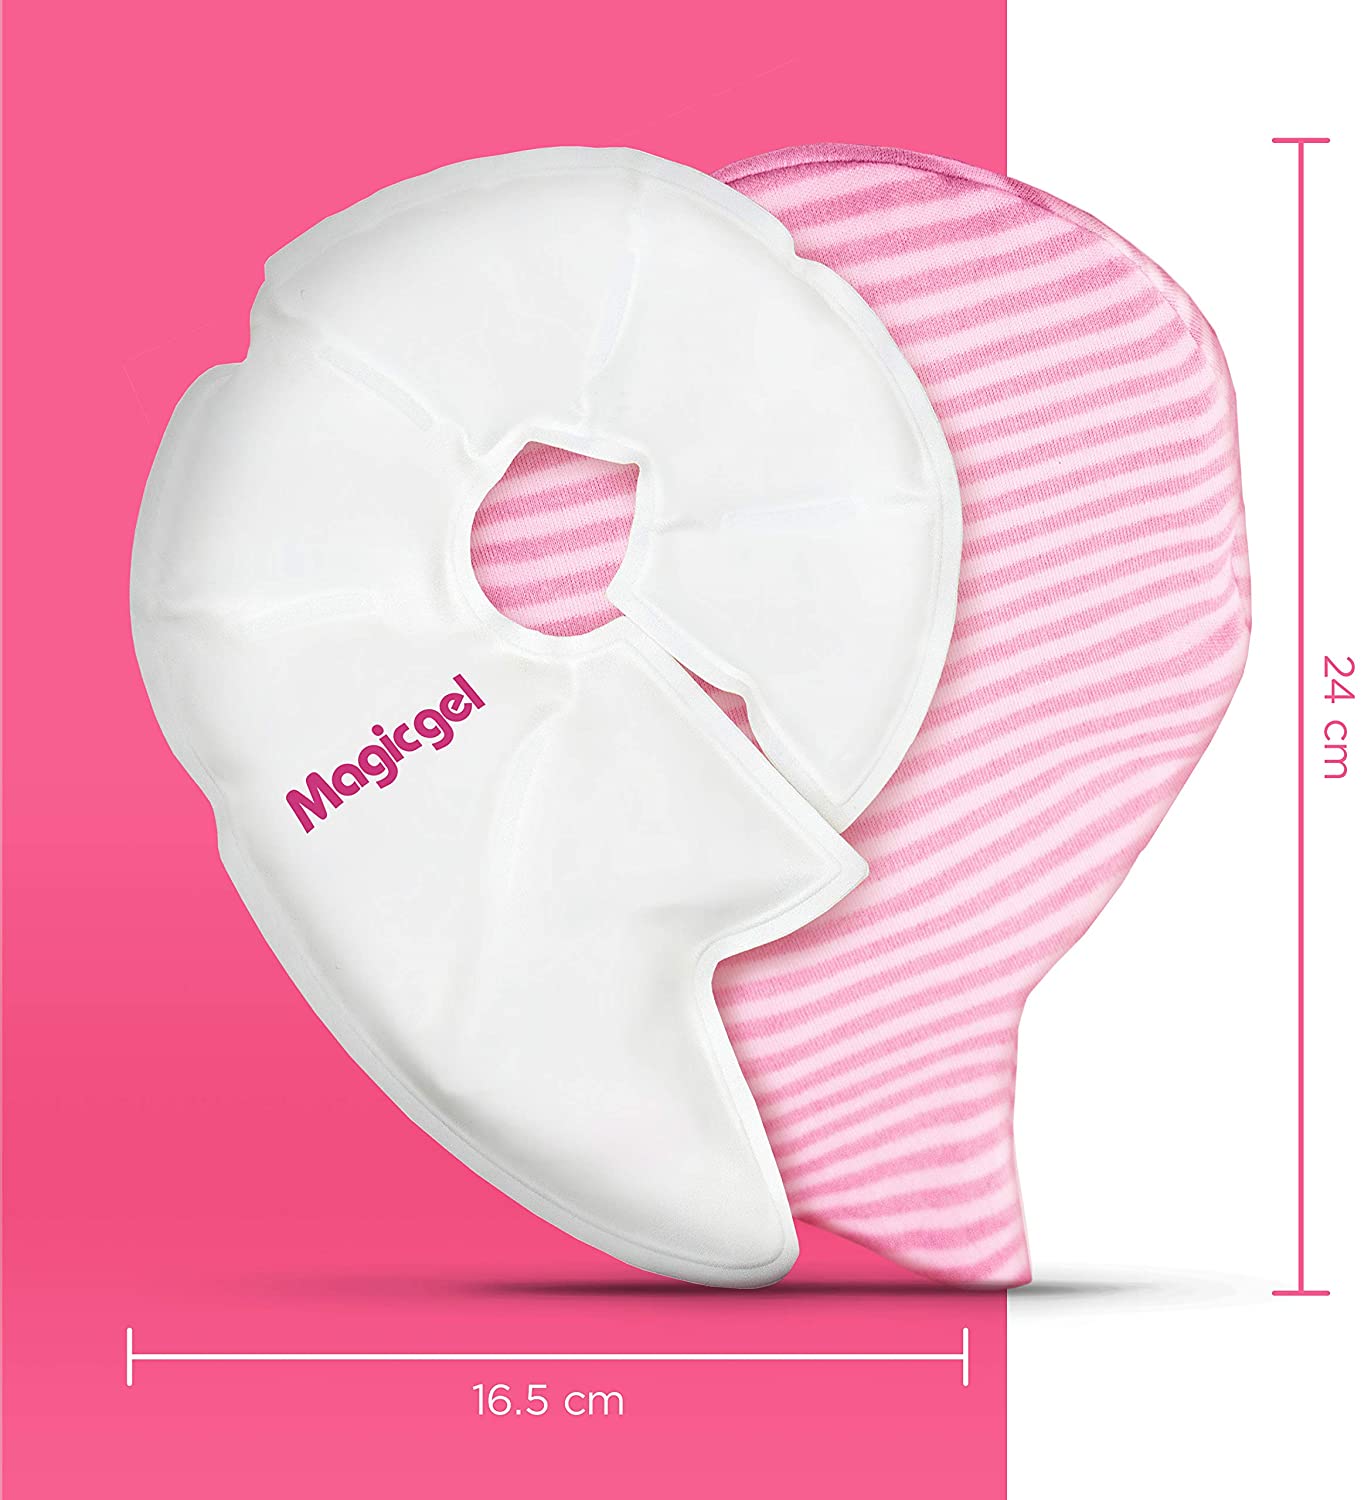 Premium Breast Gel packs – Perfect for Cool or Warm Breastfeeding Pain Relief